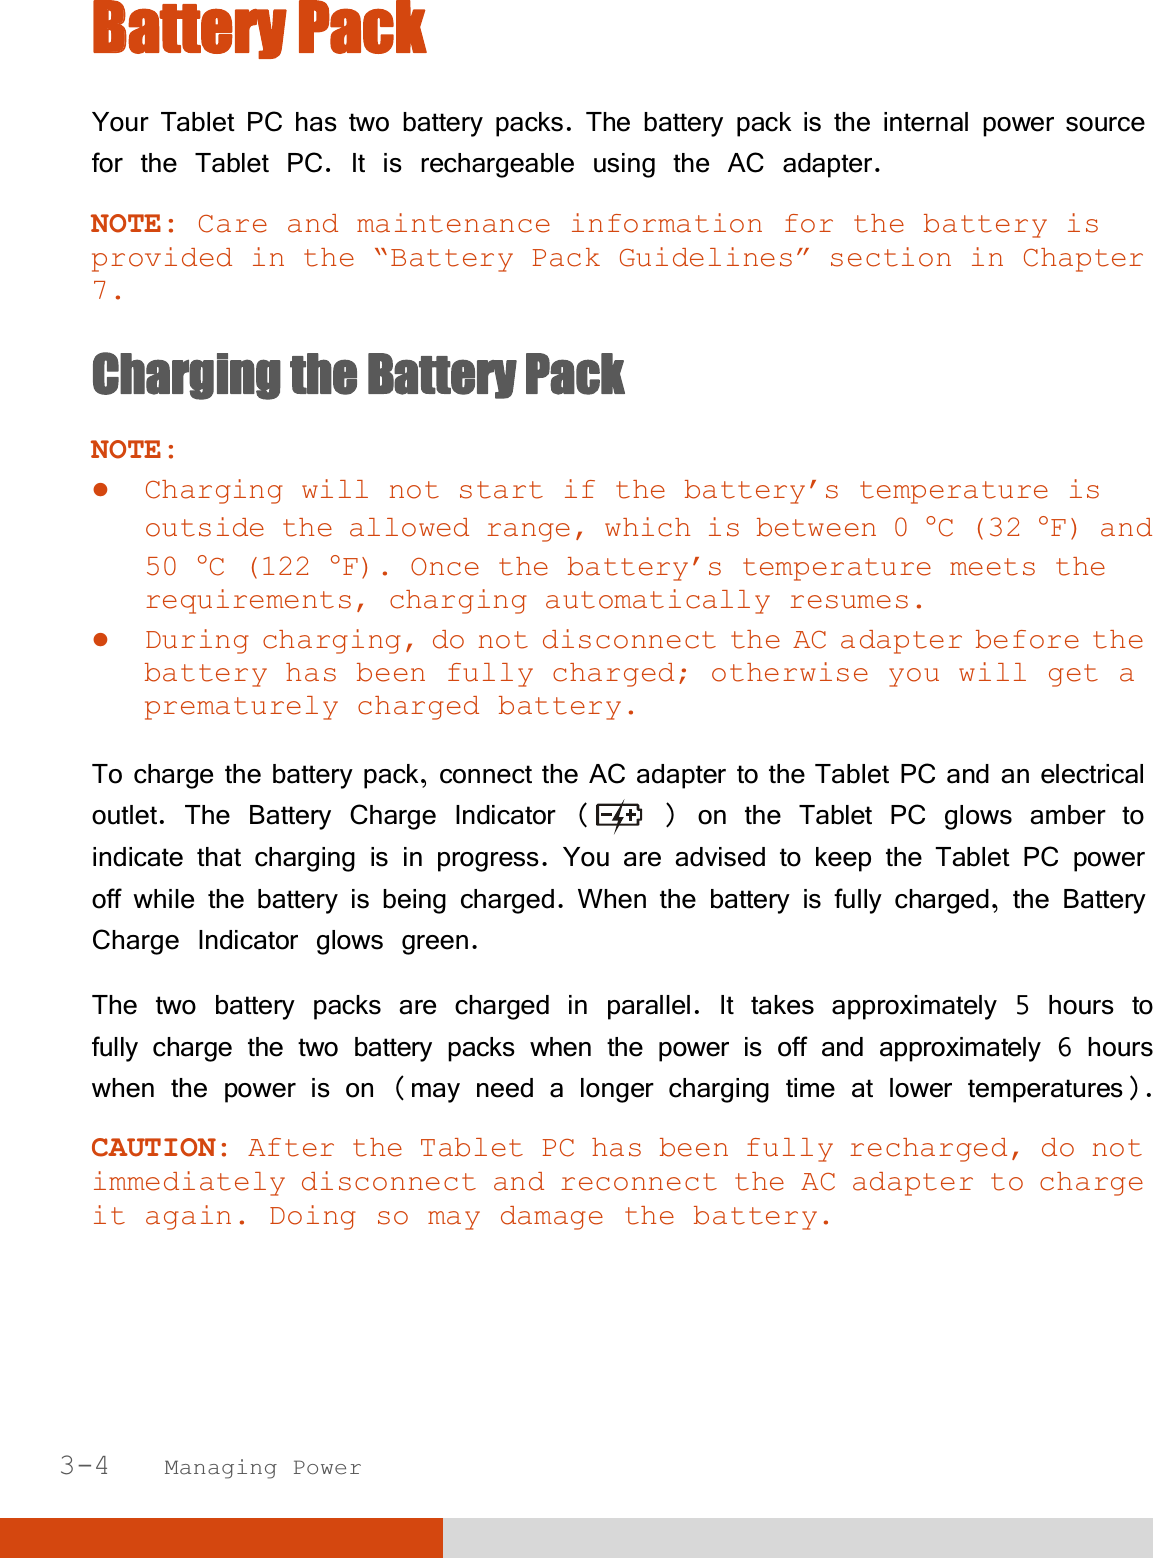  3-4   Managing Power BBattery Pack Your Tablet PC has two battery packs. The battery pack is the internal power source for the Tablet PC. It is rechargeable using the AC adapter. NOTE: Care and maintenance information for the battery is provided in the “Battery Pack Guidelines” section in Chapter 7. Charging the Battery Pack NOTE:  Charging will not start if the battery’s temperature is outside the allowed range, which is between 0 °C (32 °F) and 50 °C (122 °F). Once the battery’s temperature meets the requirements, charging automatically resumes.  During charging, do not disconnect the AC adapter before the battery has been fully charged; otherwise you will get a prematurely charged battery.  To charge the battery pack, connect the AC adapter to the Tablet PC and an electrical outlet. The Battery Charge Indicator (  ) on the Tablet PC glows amber to indicate that charging is in progress. You are advised to keep the Tablet PC power off while the battery is being charged. When the battery is fully charged, the Battery Charge Indicator glows green. The two battery packs are charged in parallel. It takes approximately 5 hours to fully charge the two battery packs when the power is off and approximately 6 hours when the power is on (may need a longer charging time at lower temperatures). CAUTION: After the Tablet PC has been fully recharged, do not immediately disconnect and reconnect the AC adapter to charge it again. Doing so may damage the battery.  